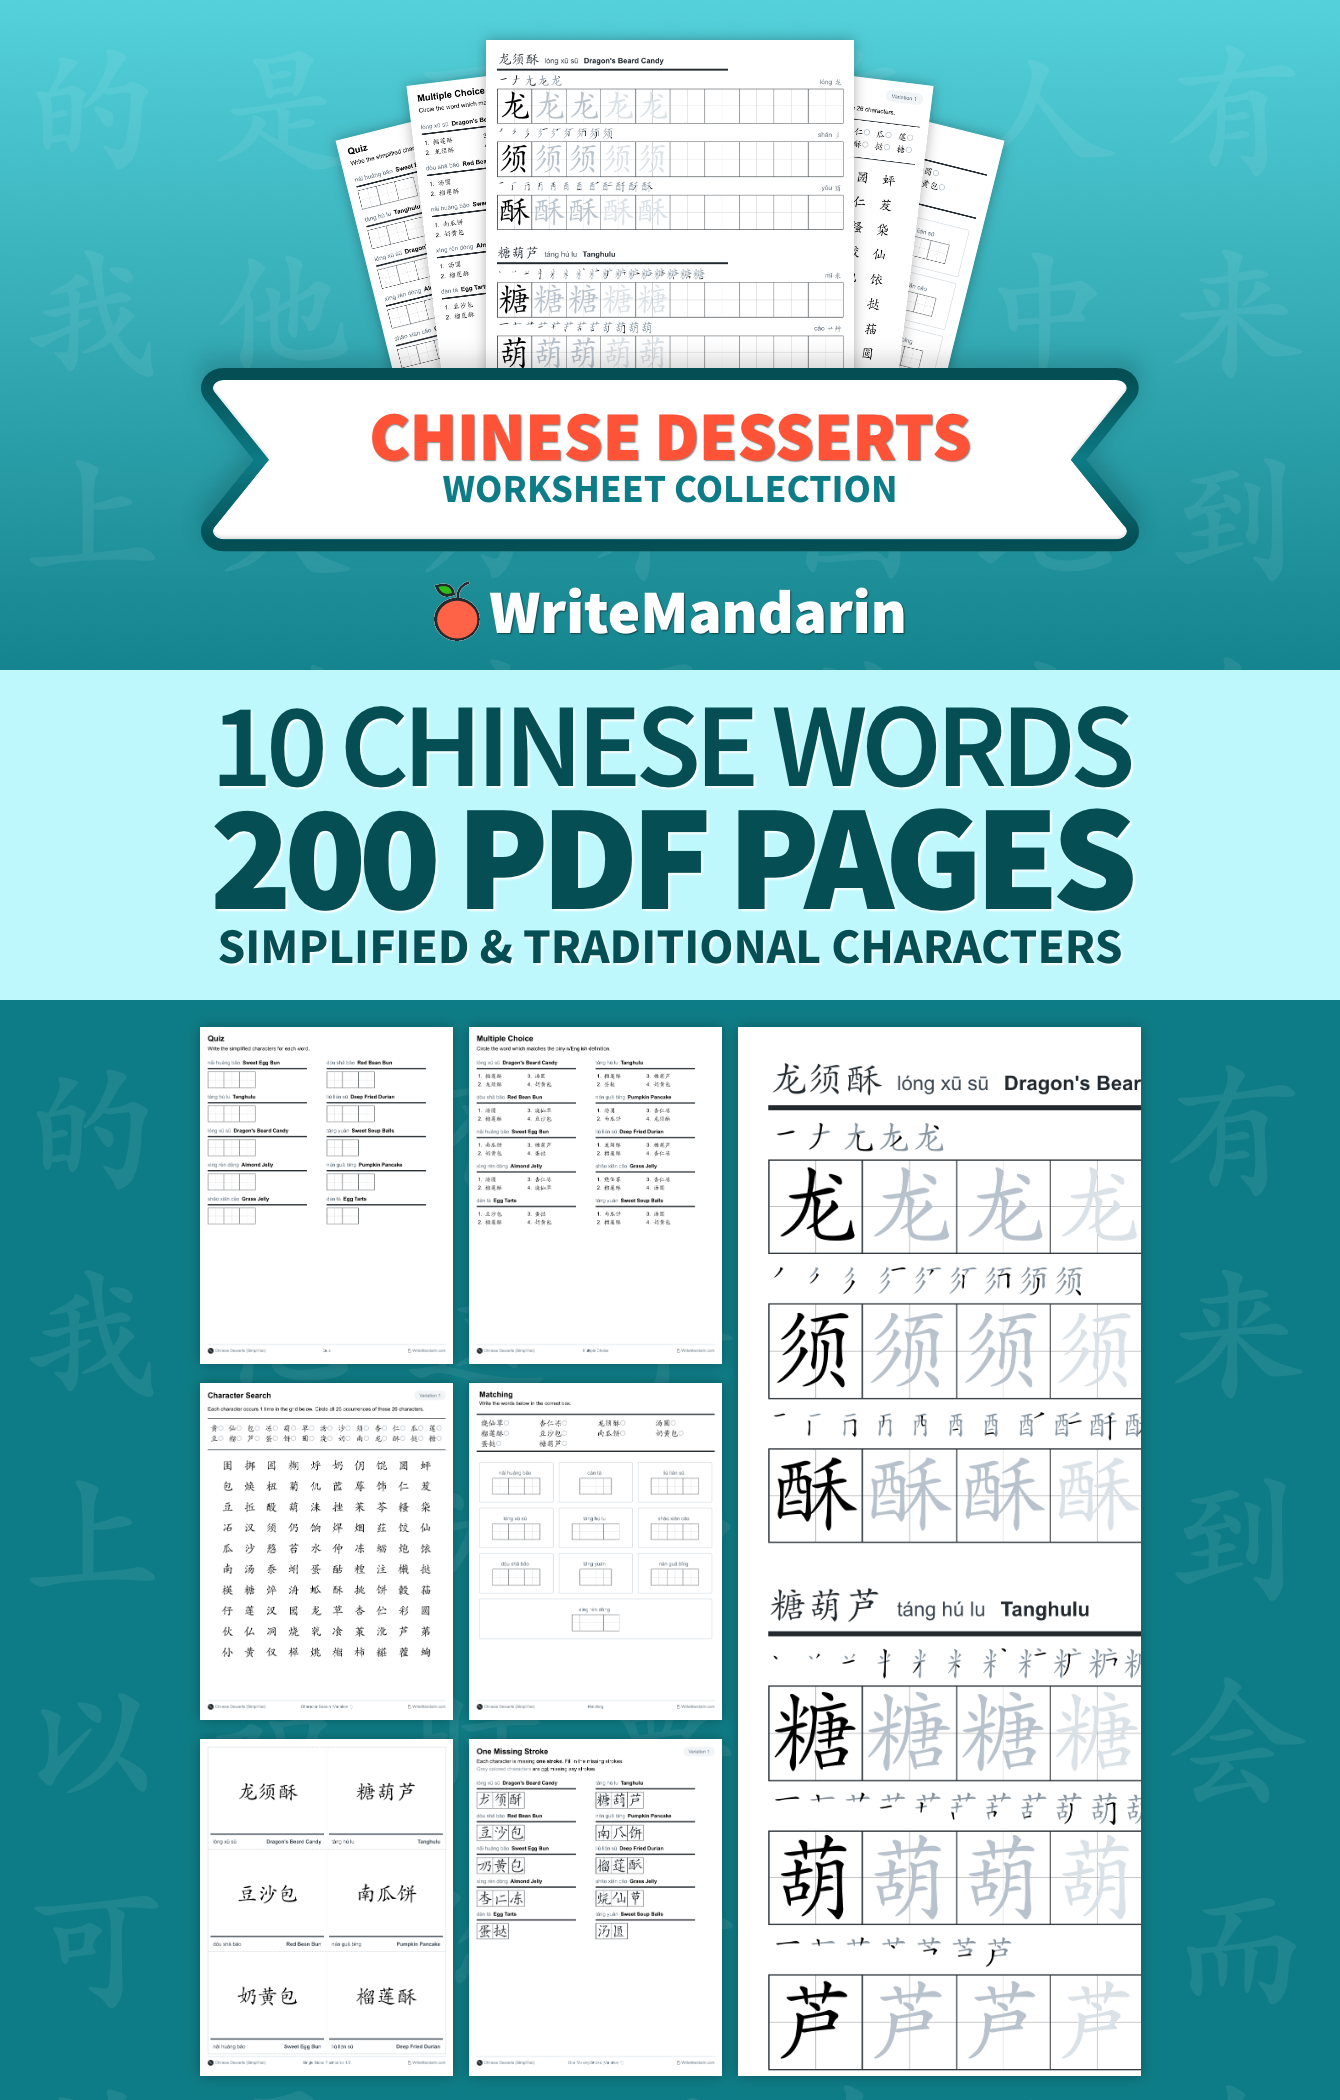 Preview image of Chinese Desserts worksheet collection